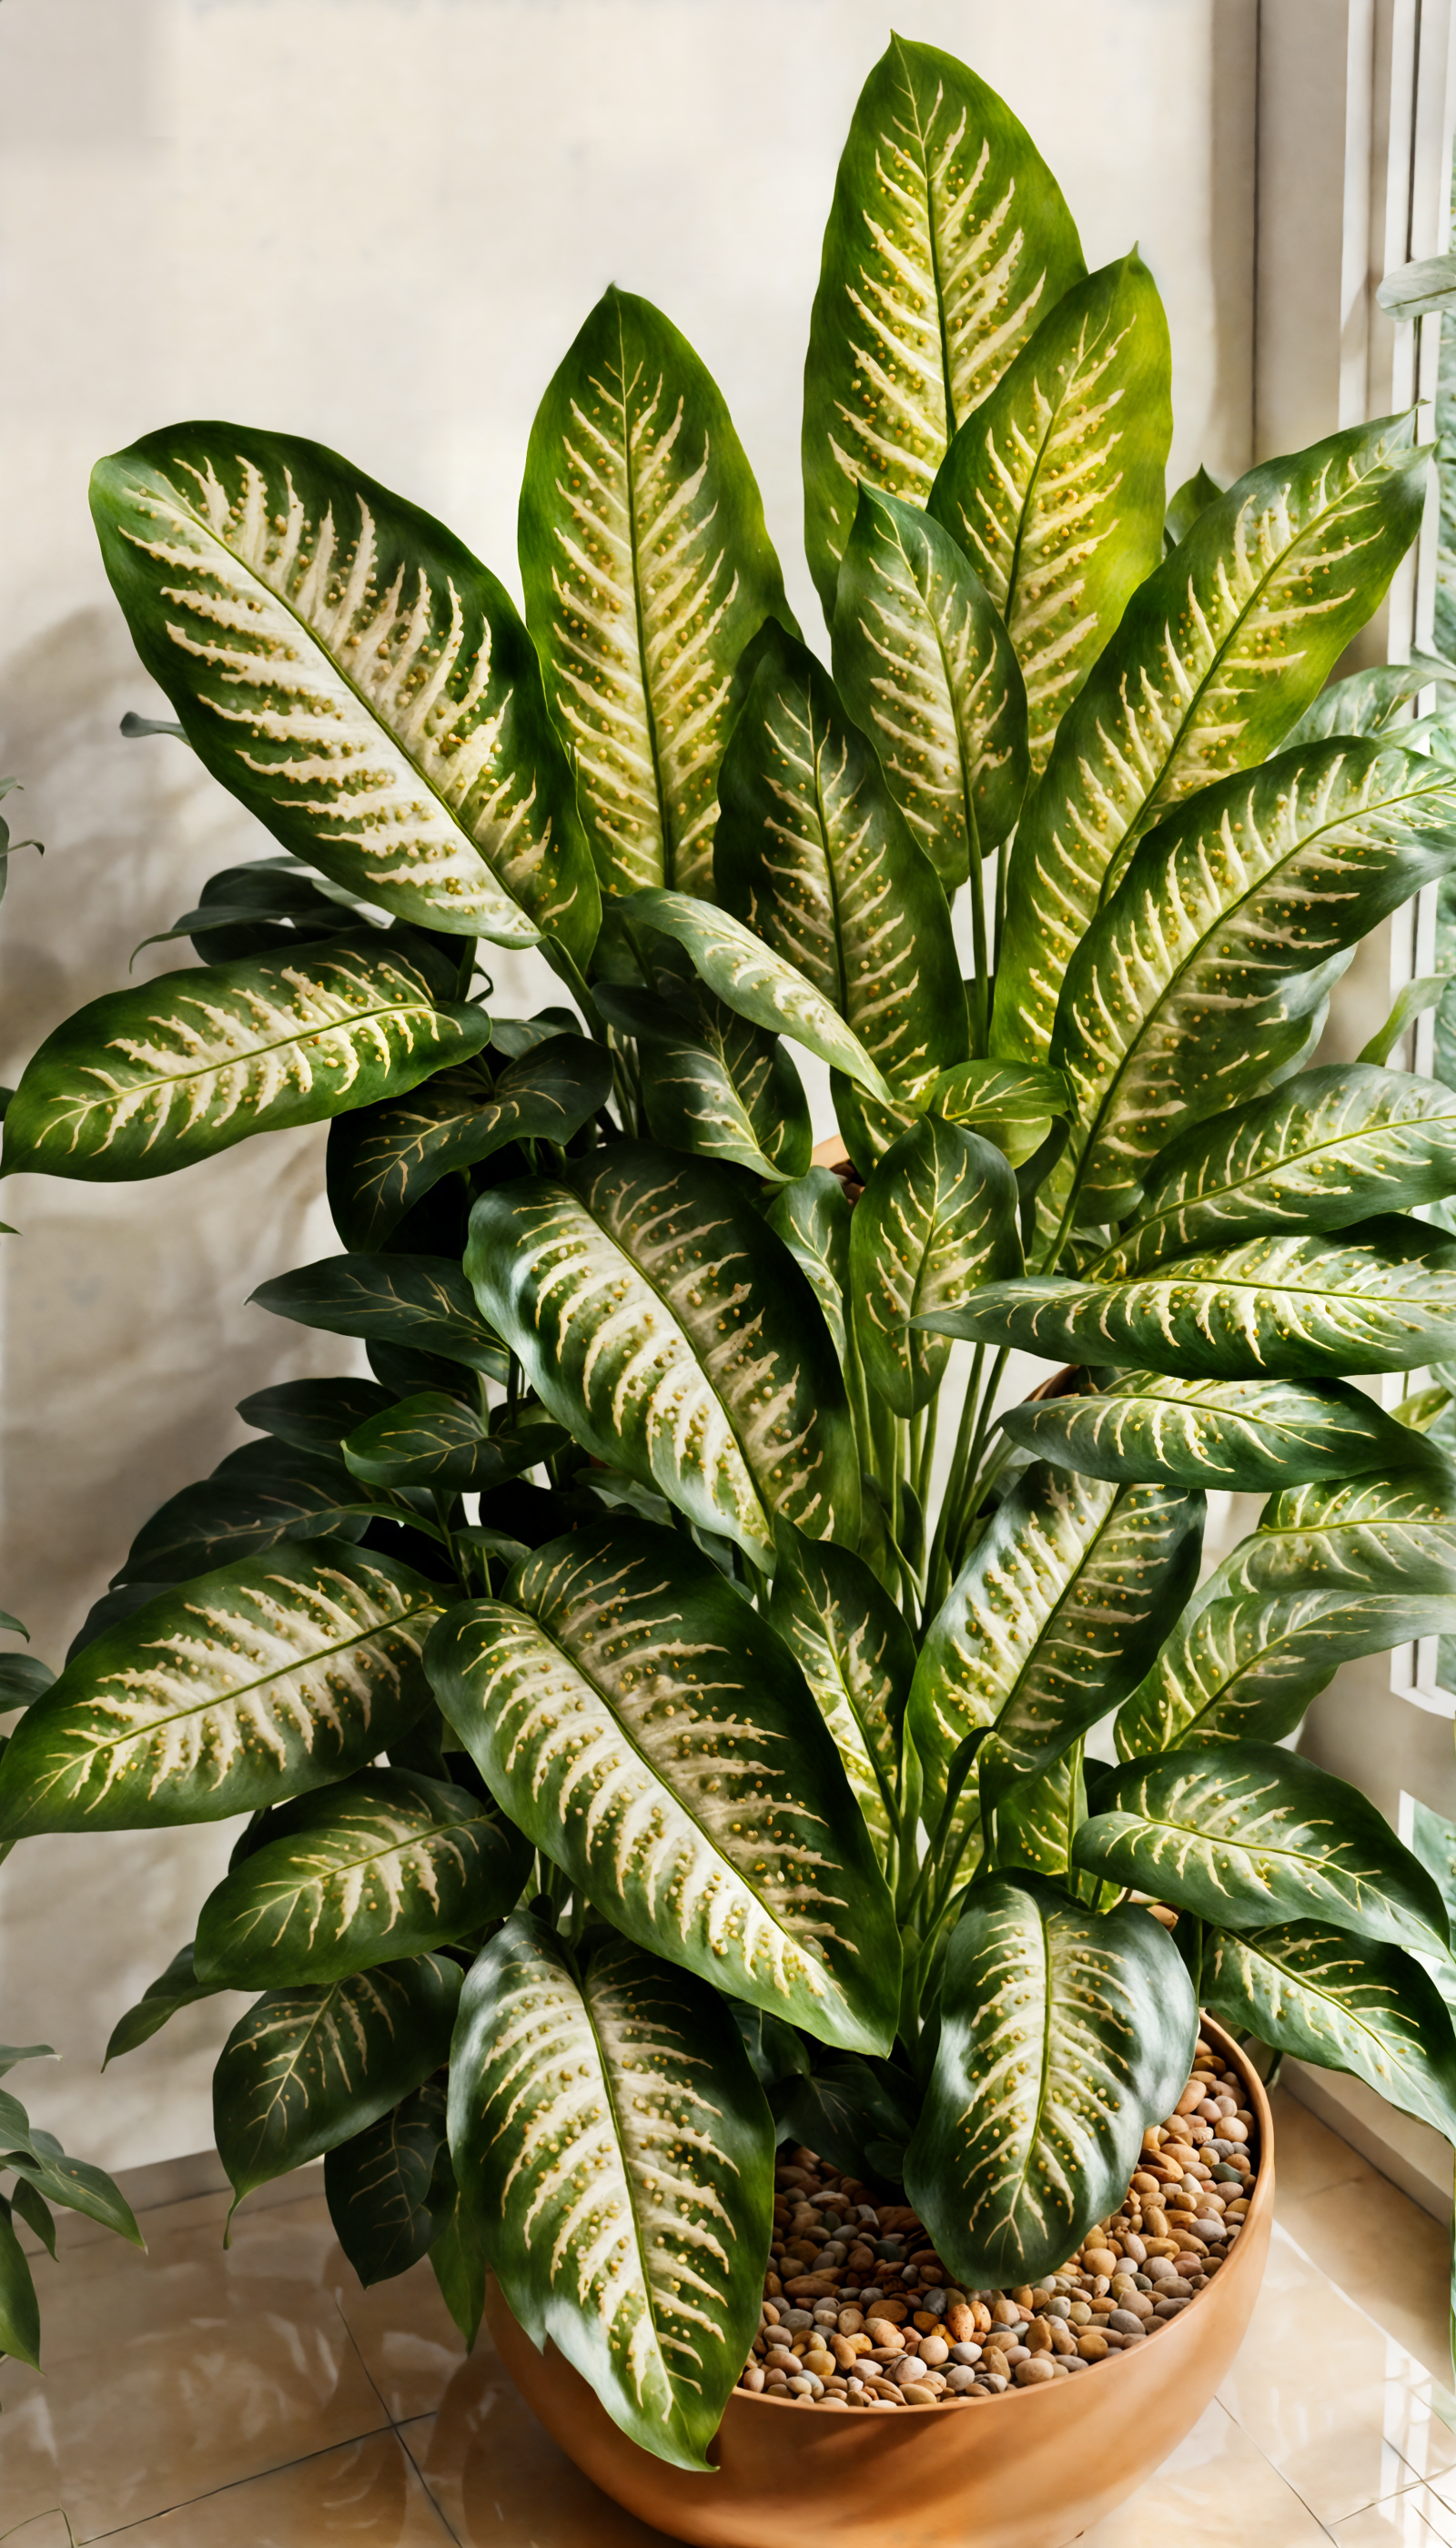 Dieffenbachia seguine in a bowl planter, with more plants behind, in a well-lit indoor setting.